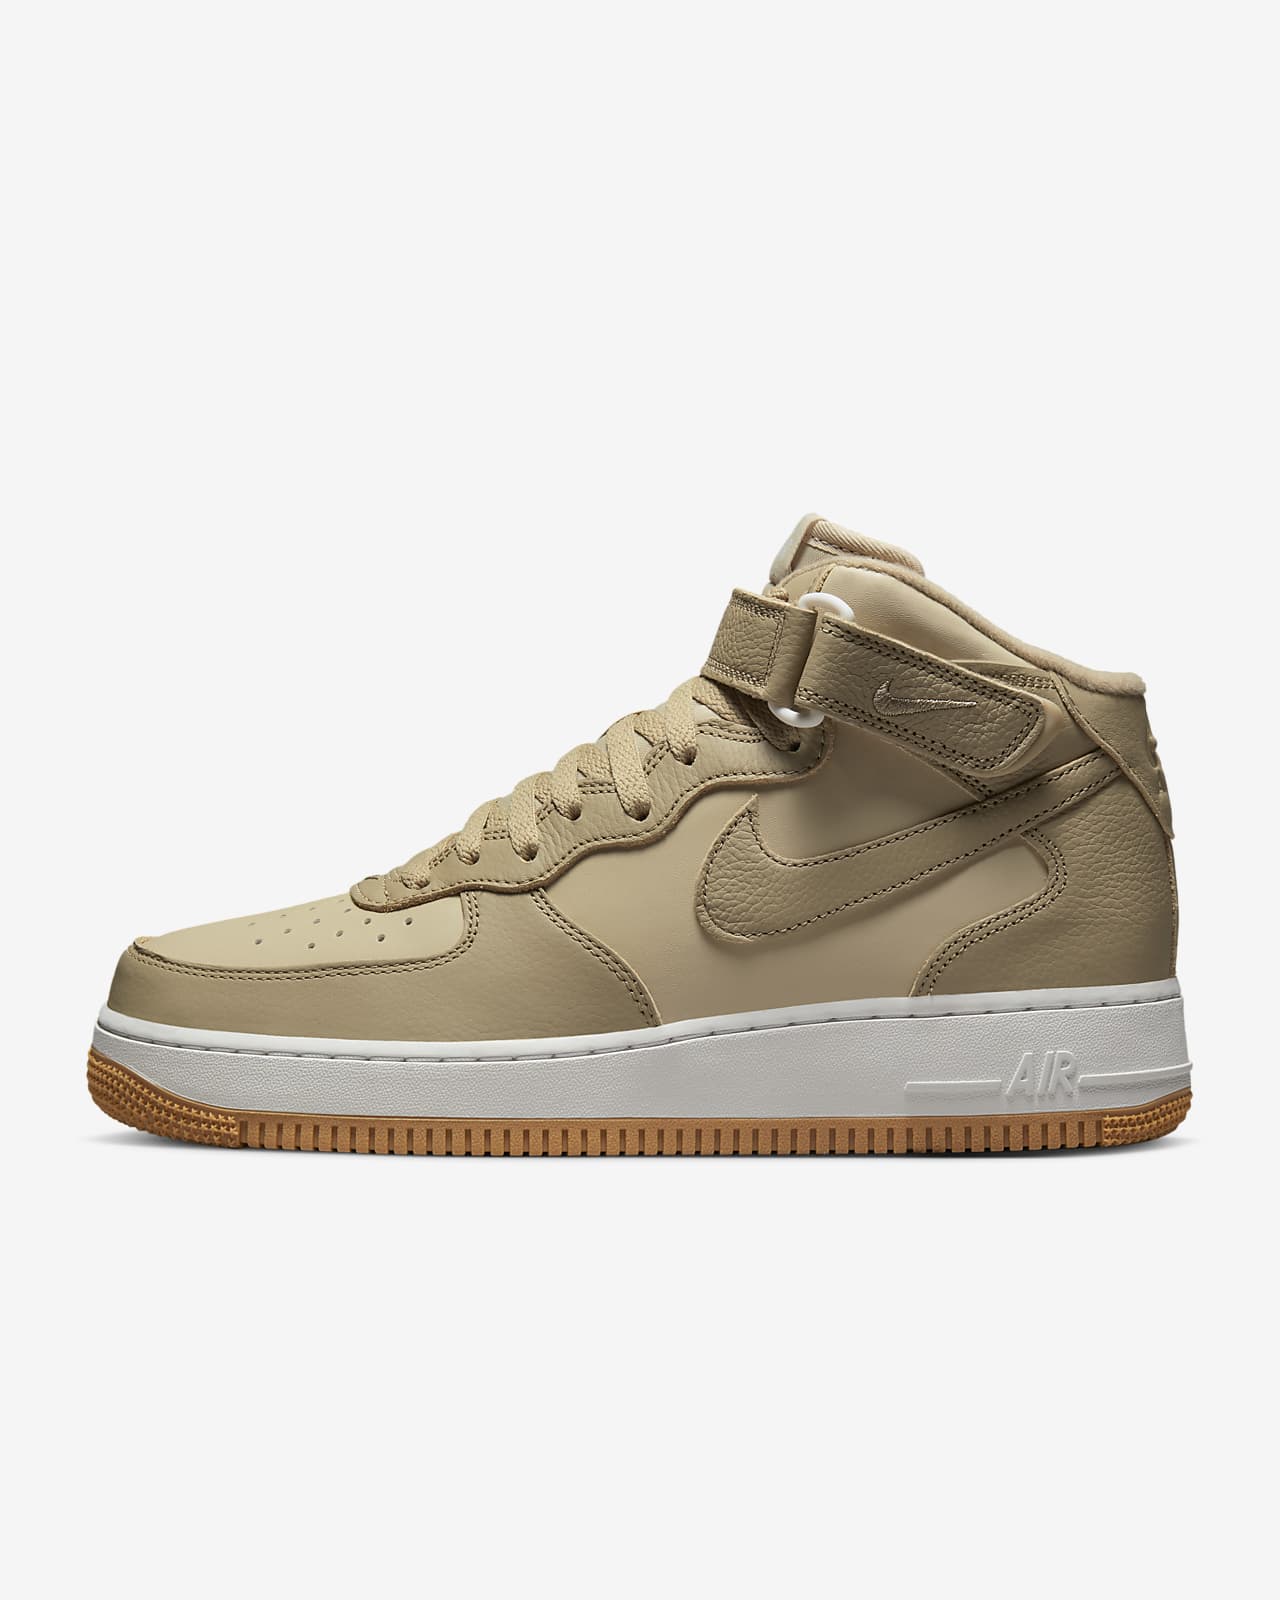 Nike Air Force 1 Mid '07 LX Men's Shoes. Nike RO